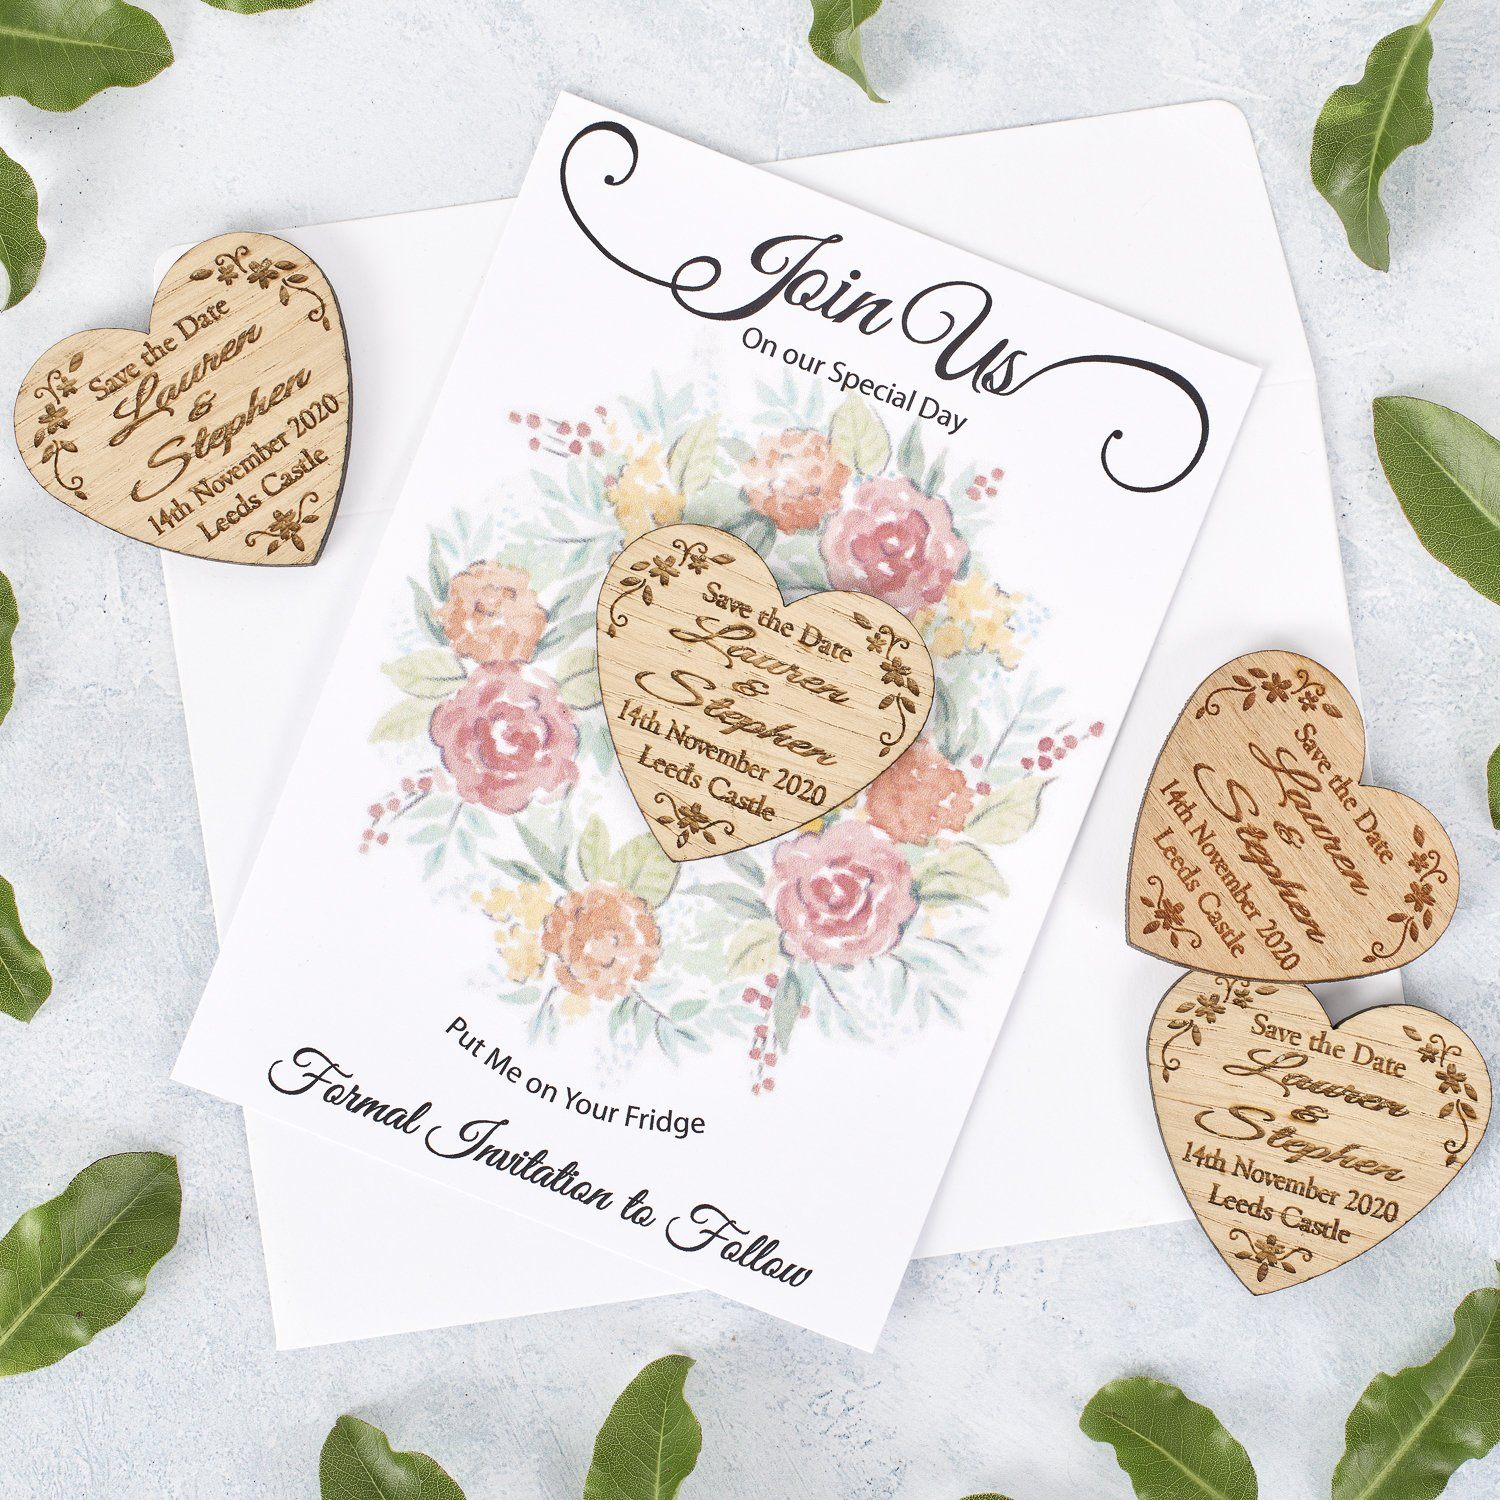 Save The Date Magnet With Cards - Save The Date Magnet Wooden Rustic & Cards - Heart Floral